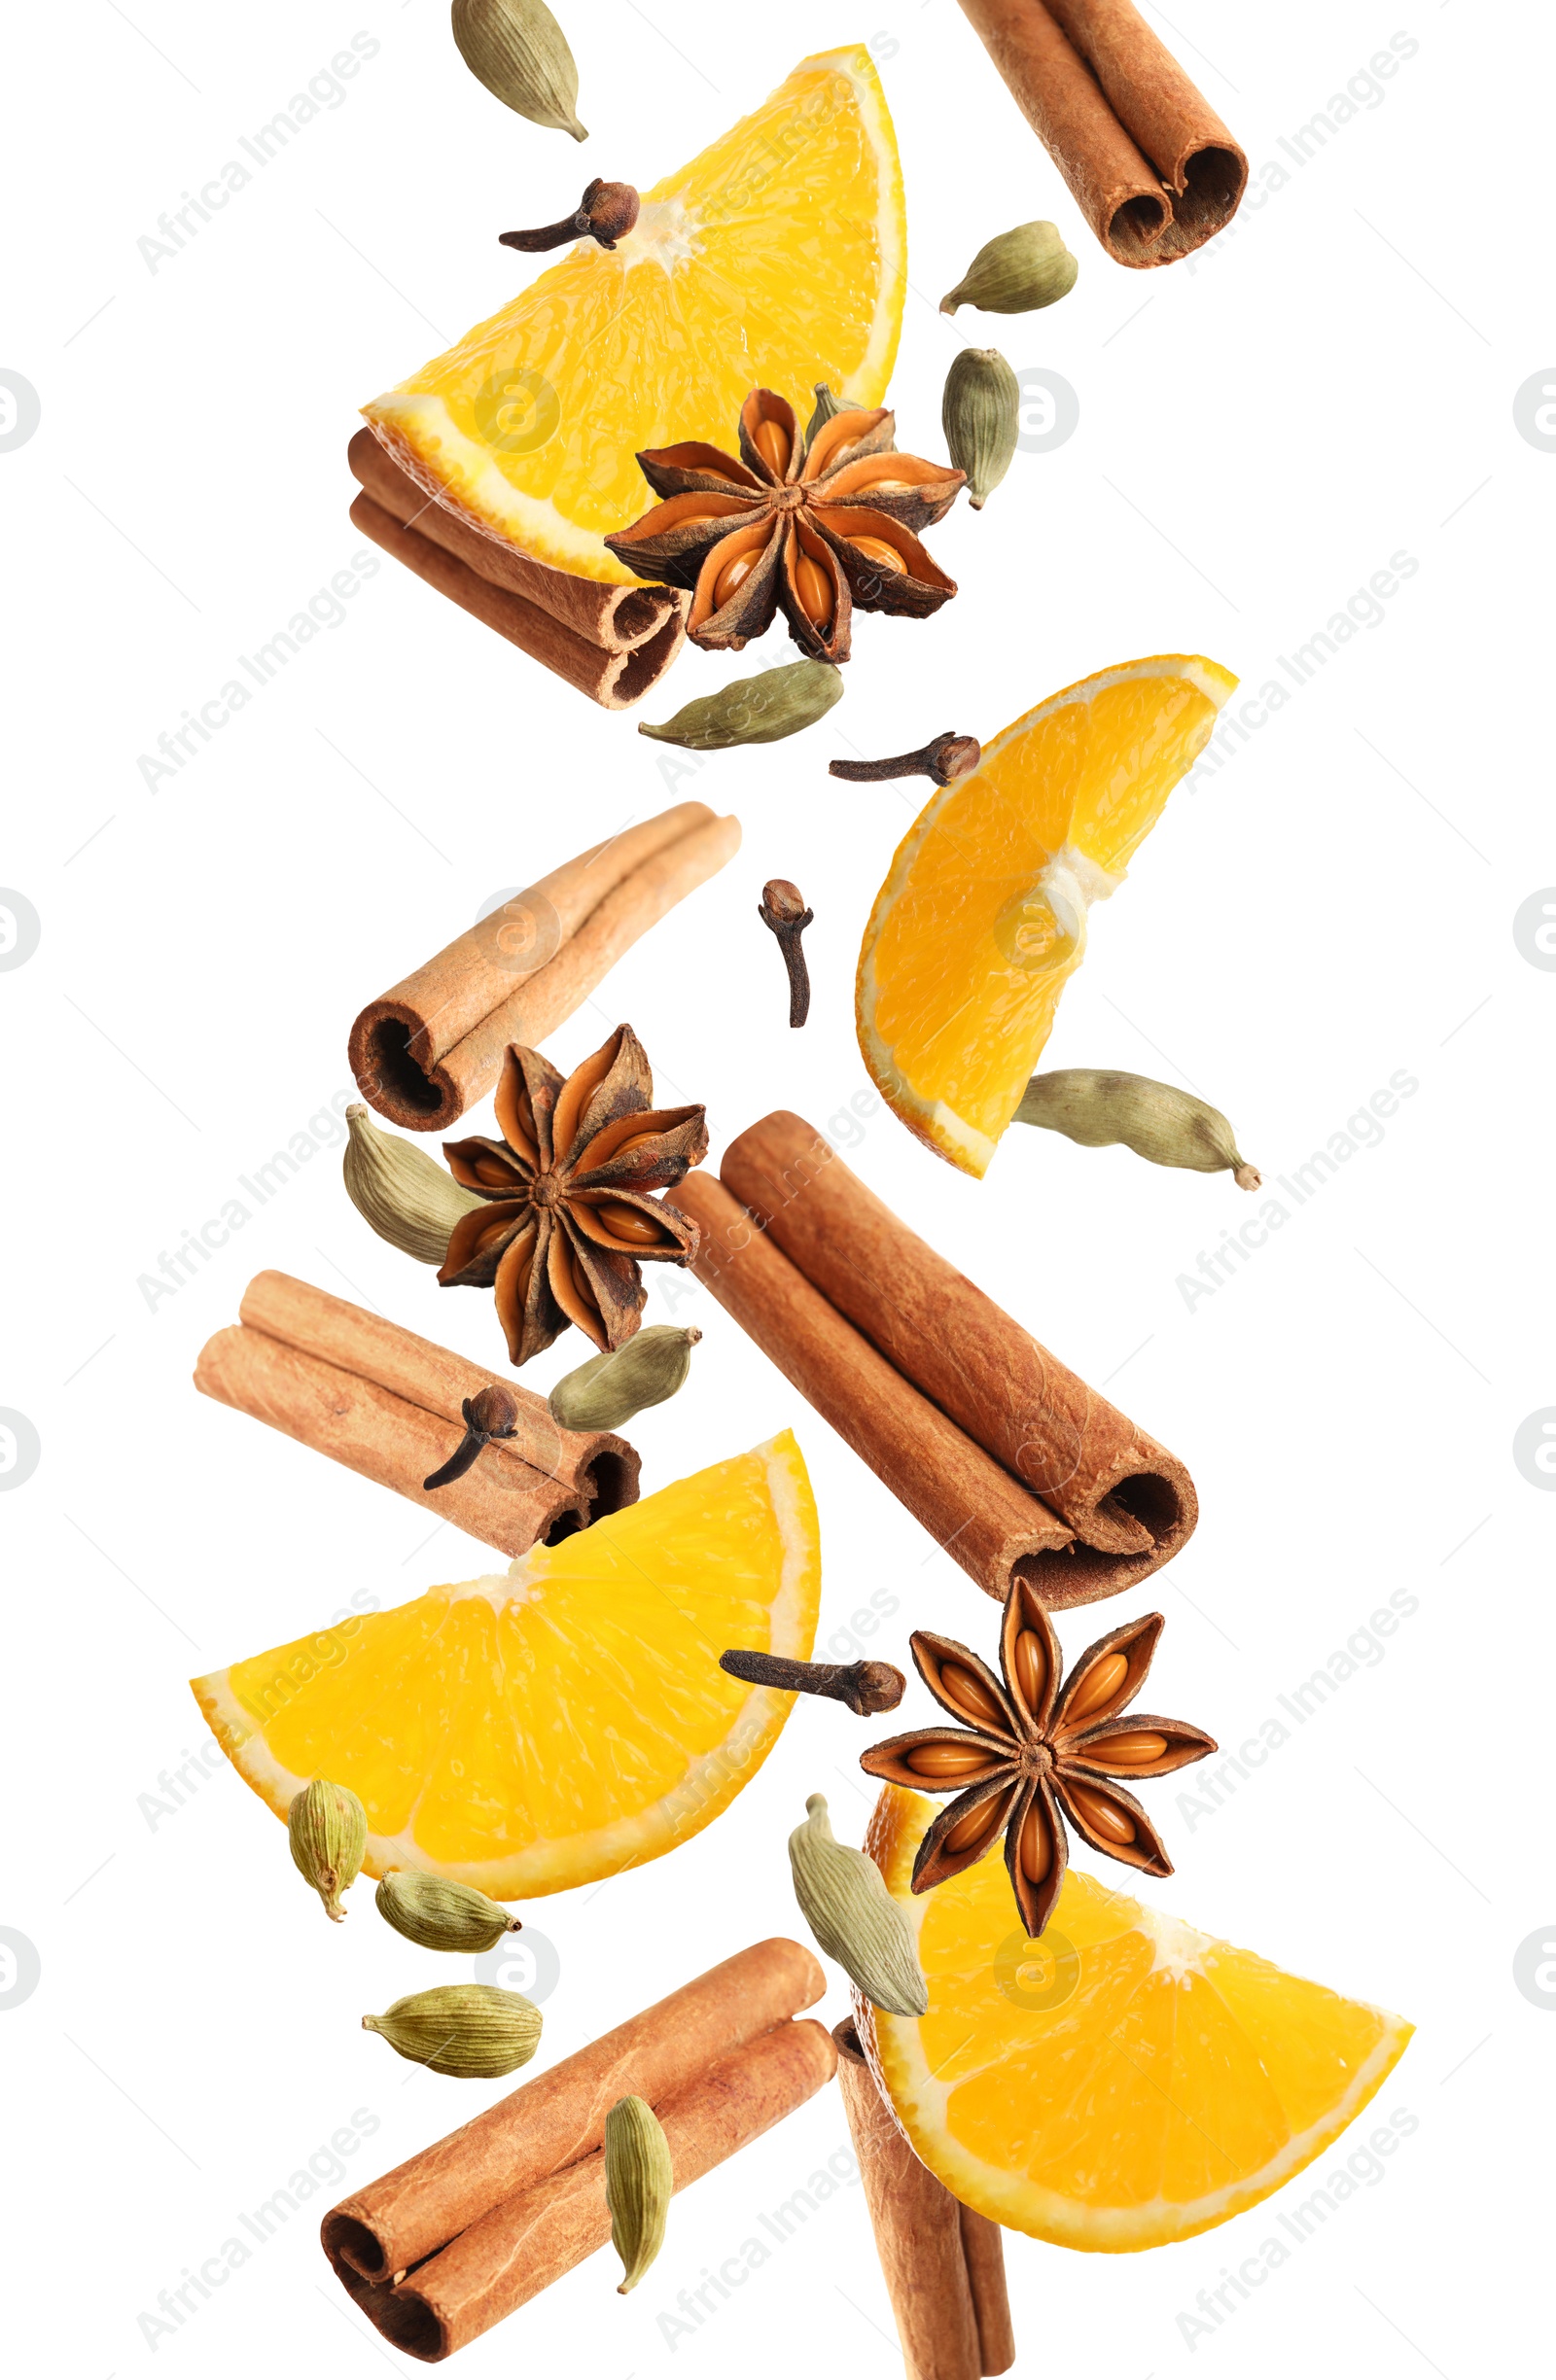 Image of Pieces of fresh orange, aromatic anise stars, cinnamon, cloves and cardamom falling on white background. Vertical banner design